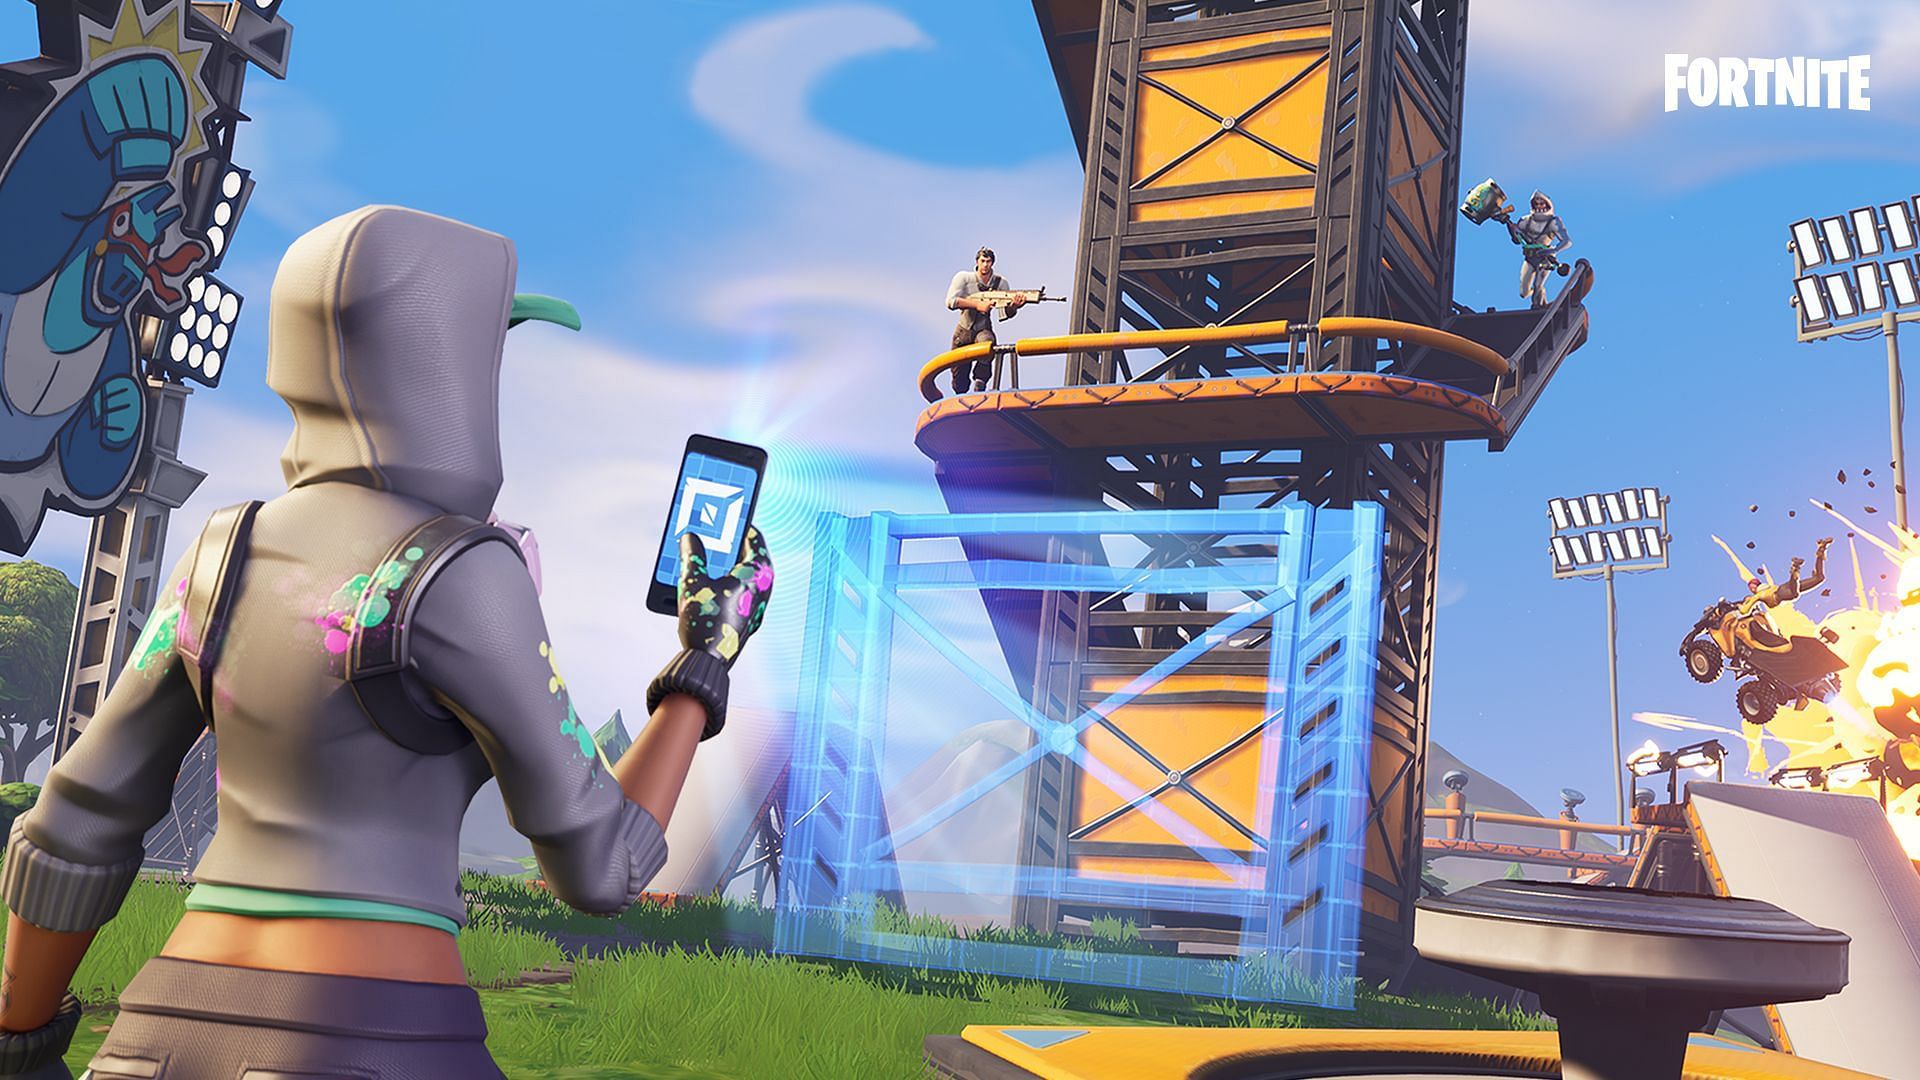 The Fortnite Creative mode can give players an added XP boost, thereby easing the grind (Image via Epic Games)